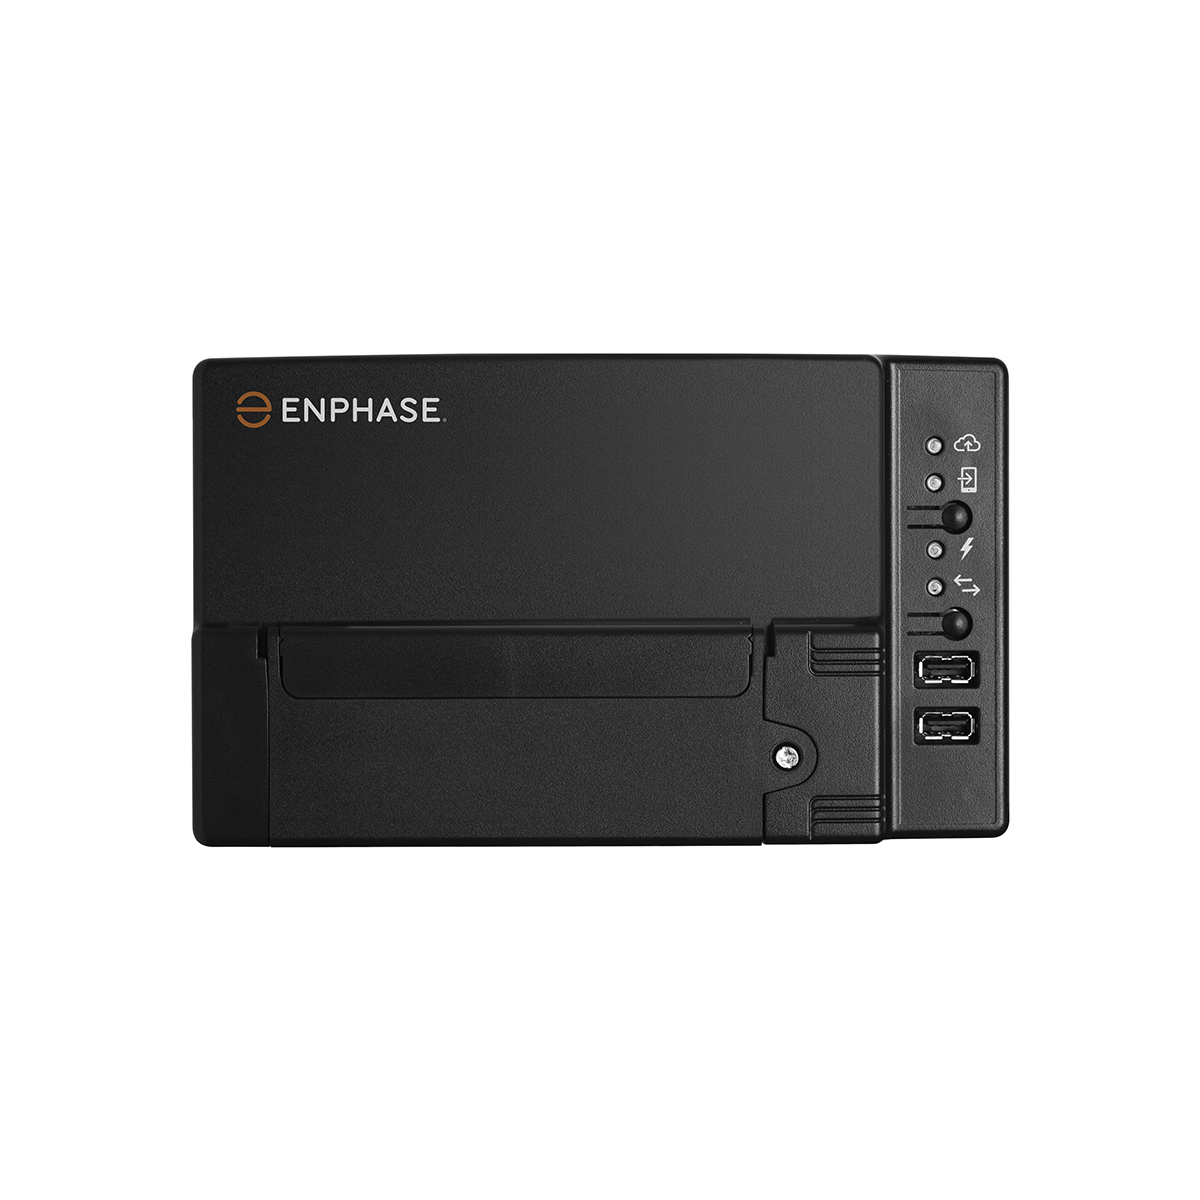 23x Sunpower P6 9315 wp met Enphase IQ8A en Accu 1x N Charge 10T,1 x N Charge 3T